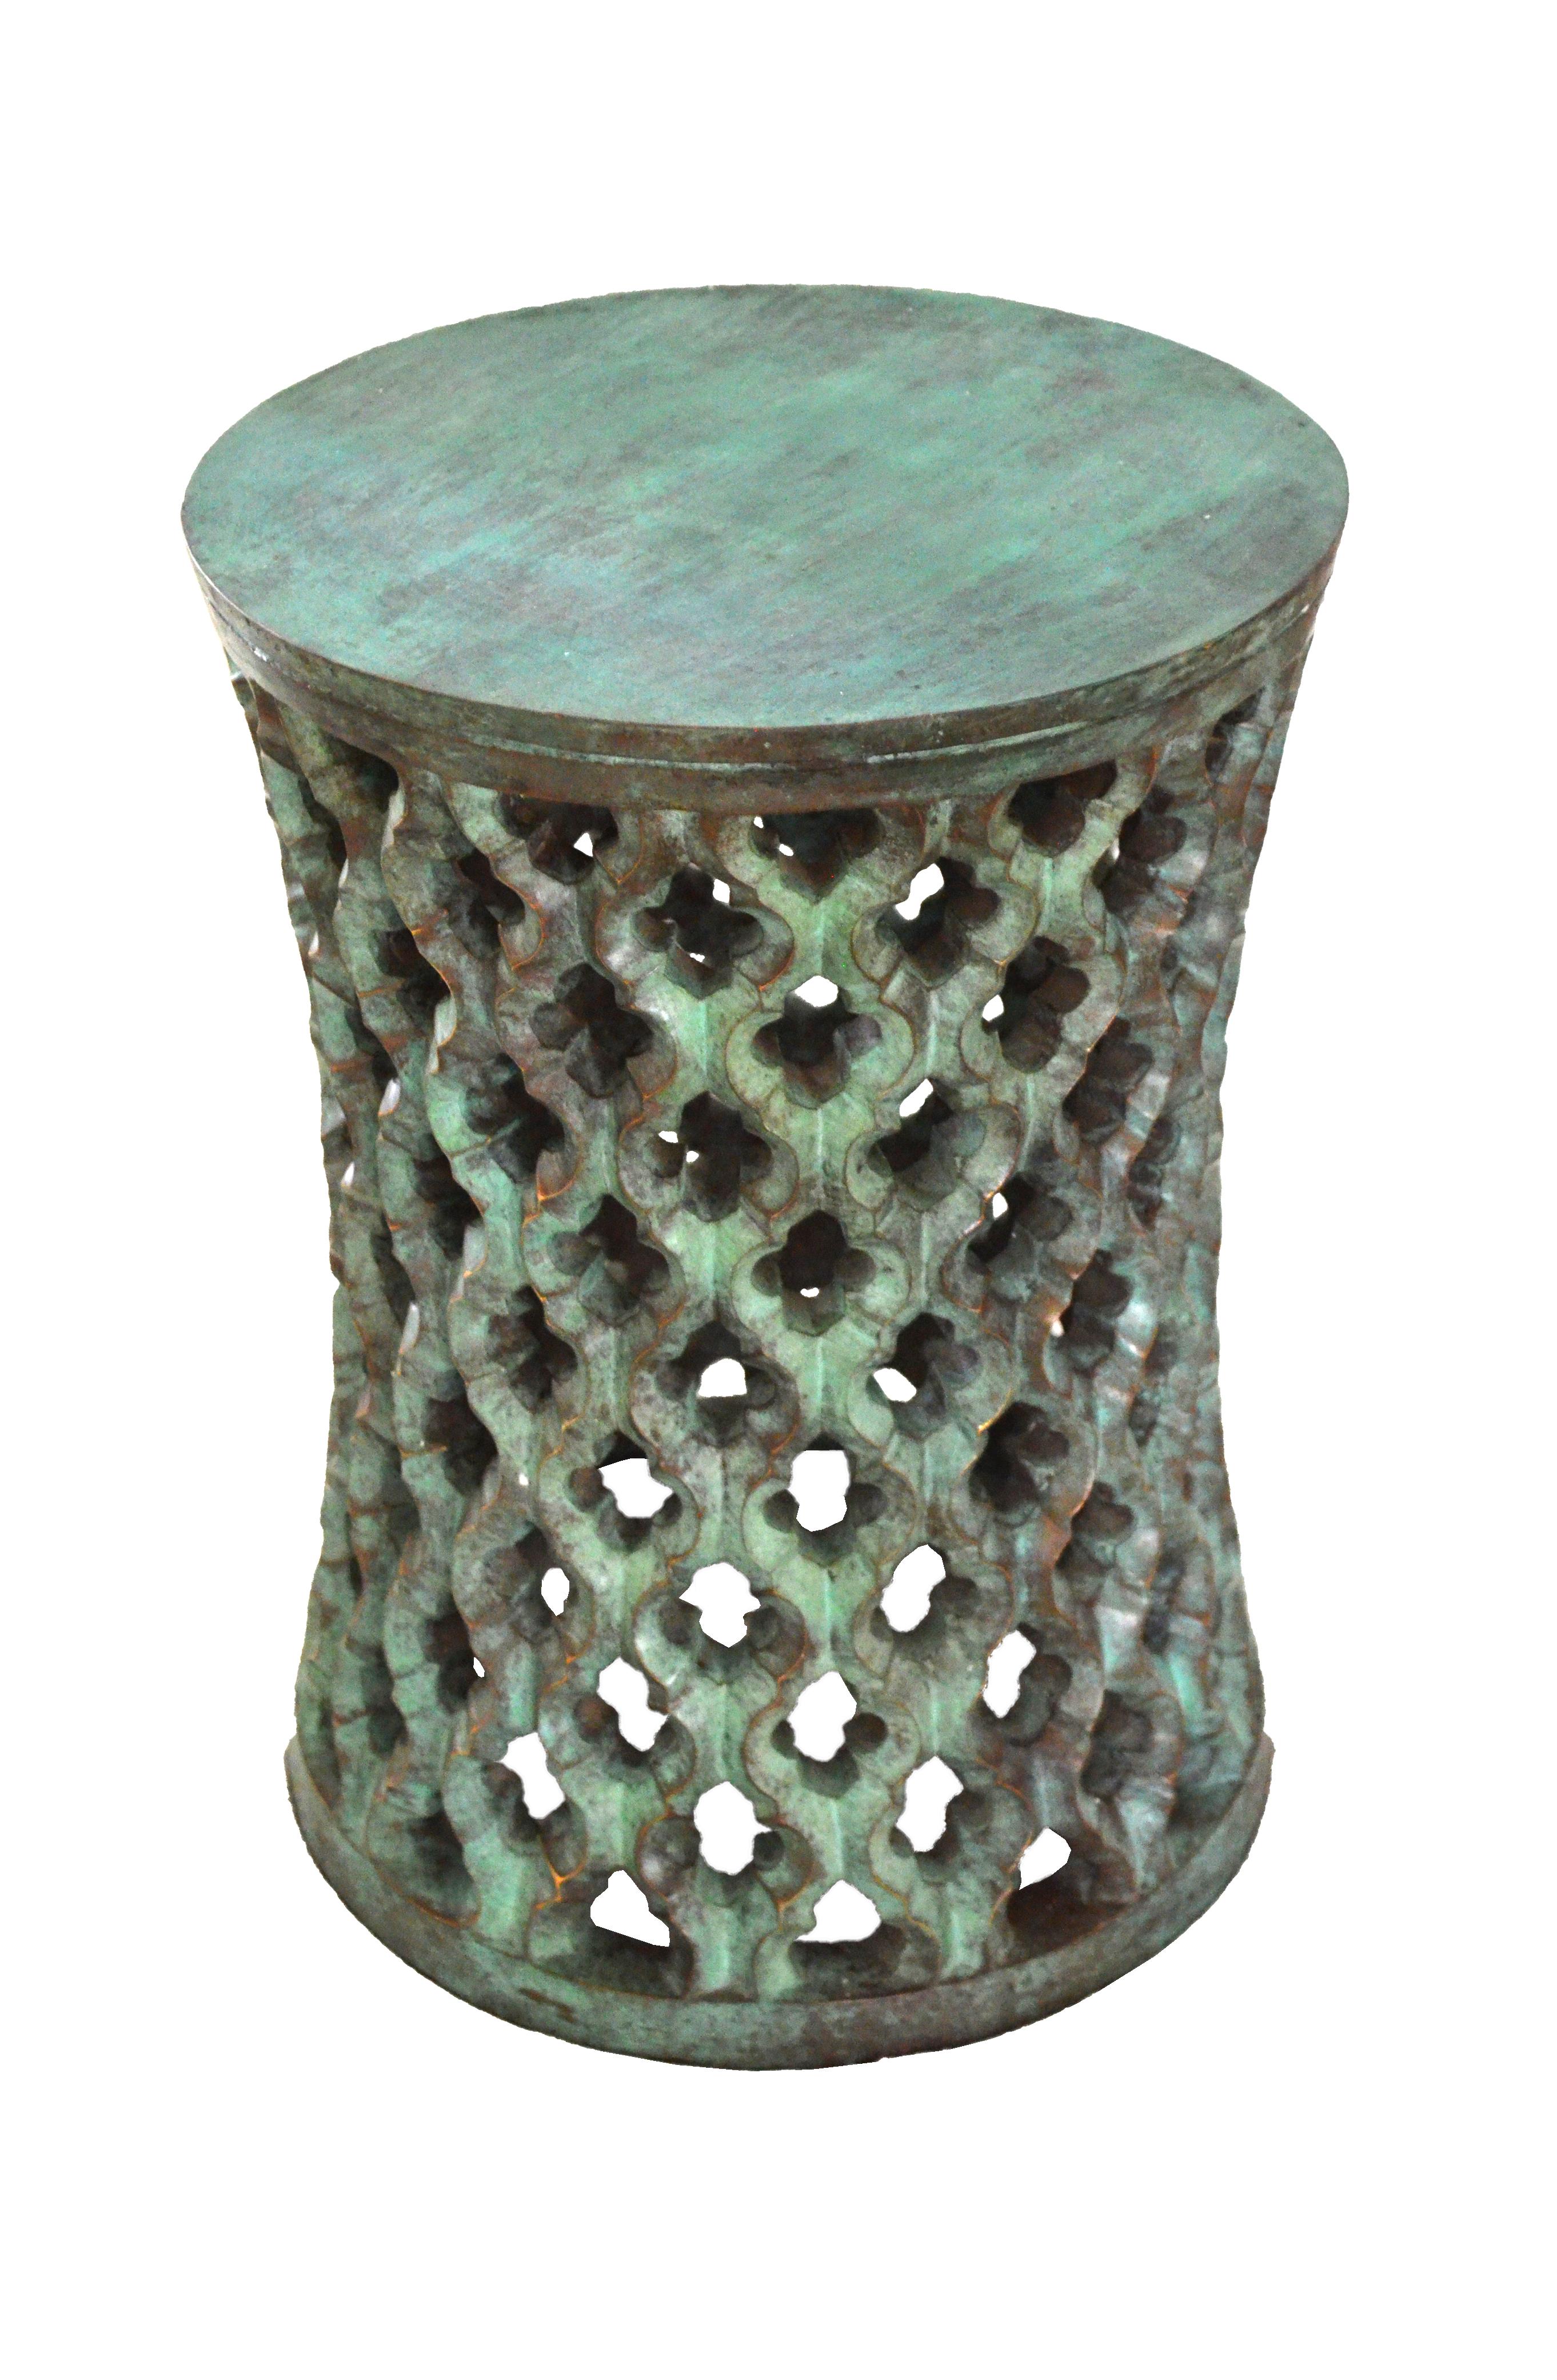 The cast brass version of the reknowned Jali table which was designed by Paul Mathieu for Stephanie Odegard Collection. Like the original marble tables, these cast tables are a statement piece.
 

Jour Round Jali Table Brass Green Patina
Size- 12